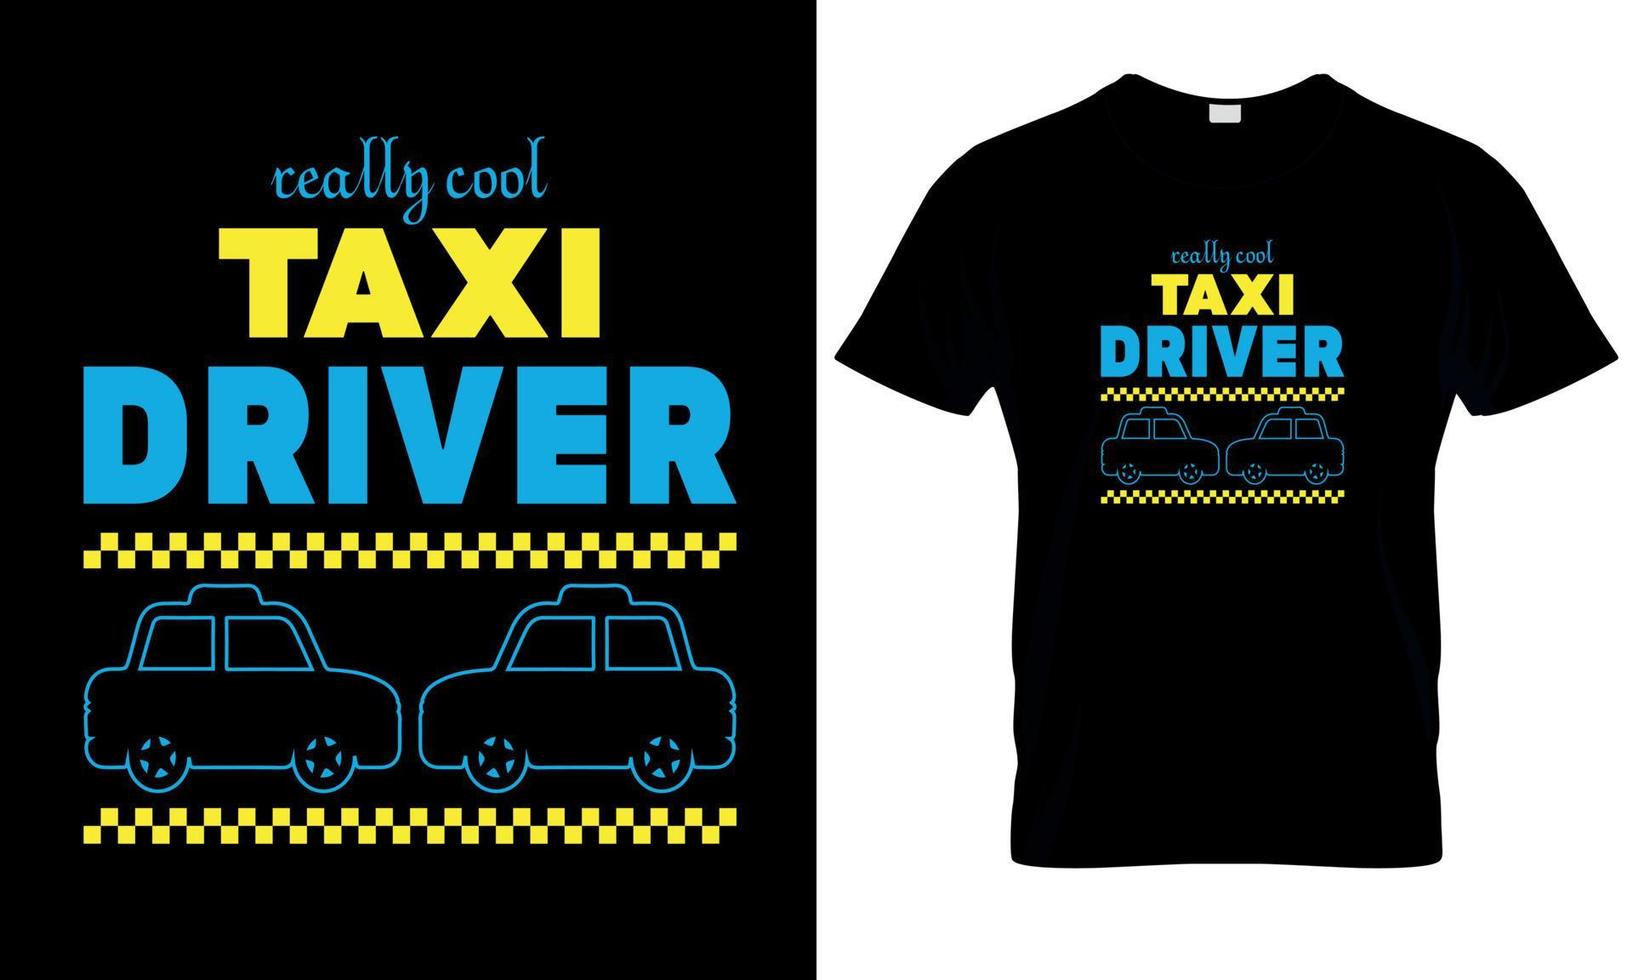 Really cool Taxi driver t shirt design vector